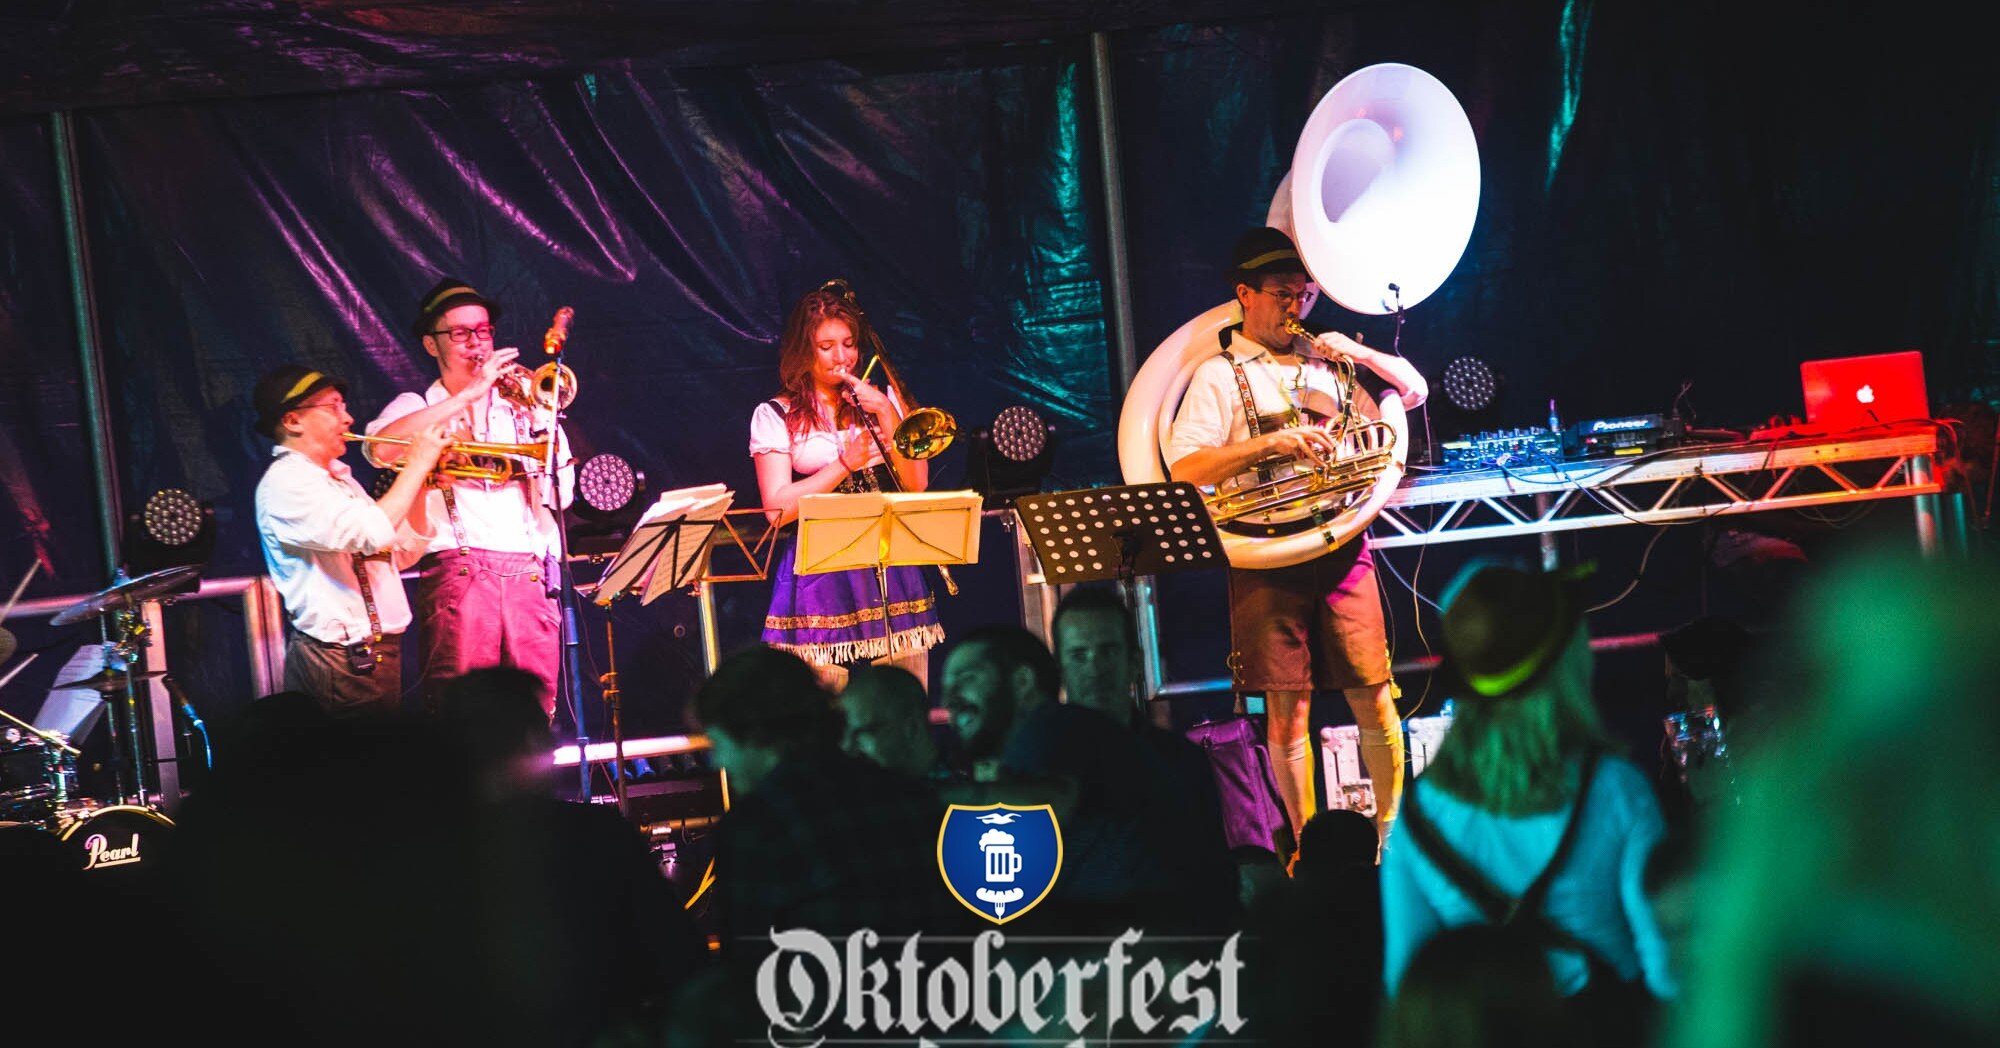 LISTEN UP YOU BAVARIAN BUNCH!! 🍻

❗Some Oktoberfest Sessions are running low on tickets!! Now is the time to grab yours before it's too late ⬇️

⚡ COLCHESTER - SATURDAY EVENING 
⚡ SOUTHEND - SATURDAY EVENING 
⚡ BEVERLEY - SATURDAY AFTERNOON 

Hit th